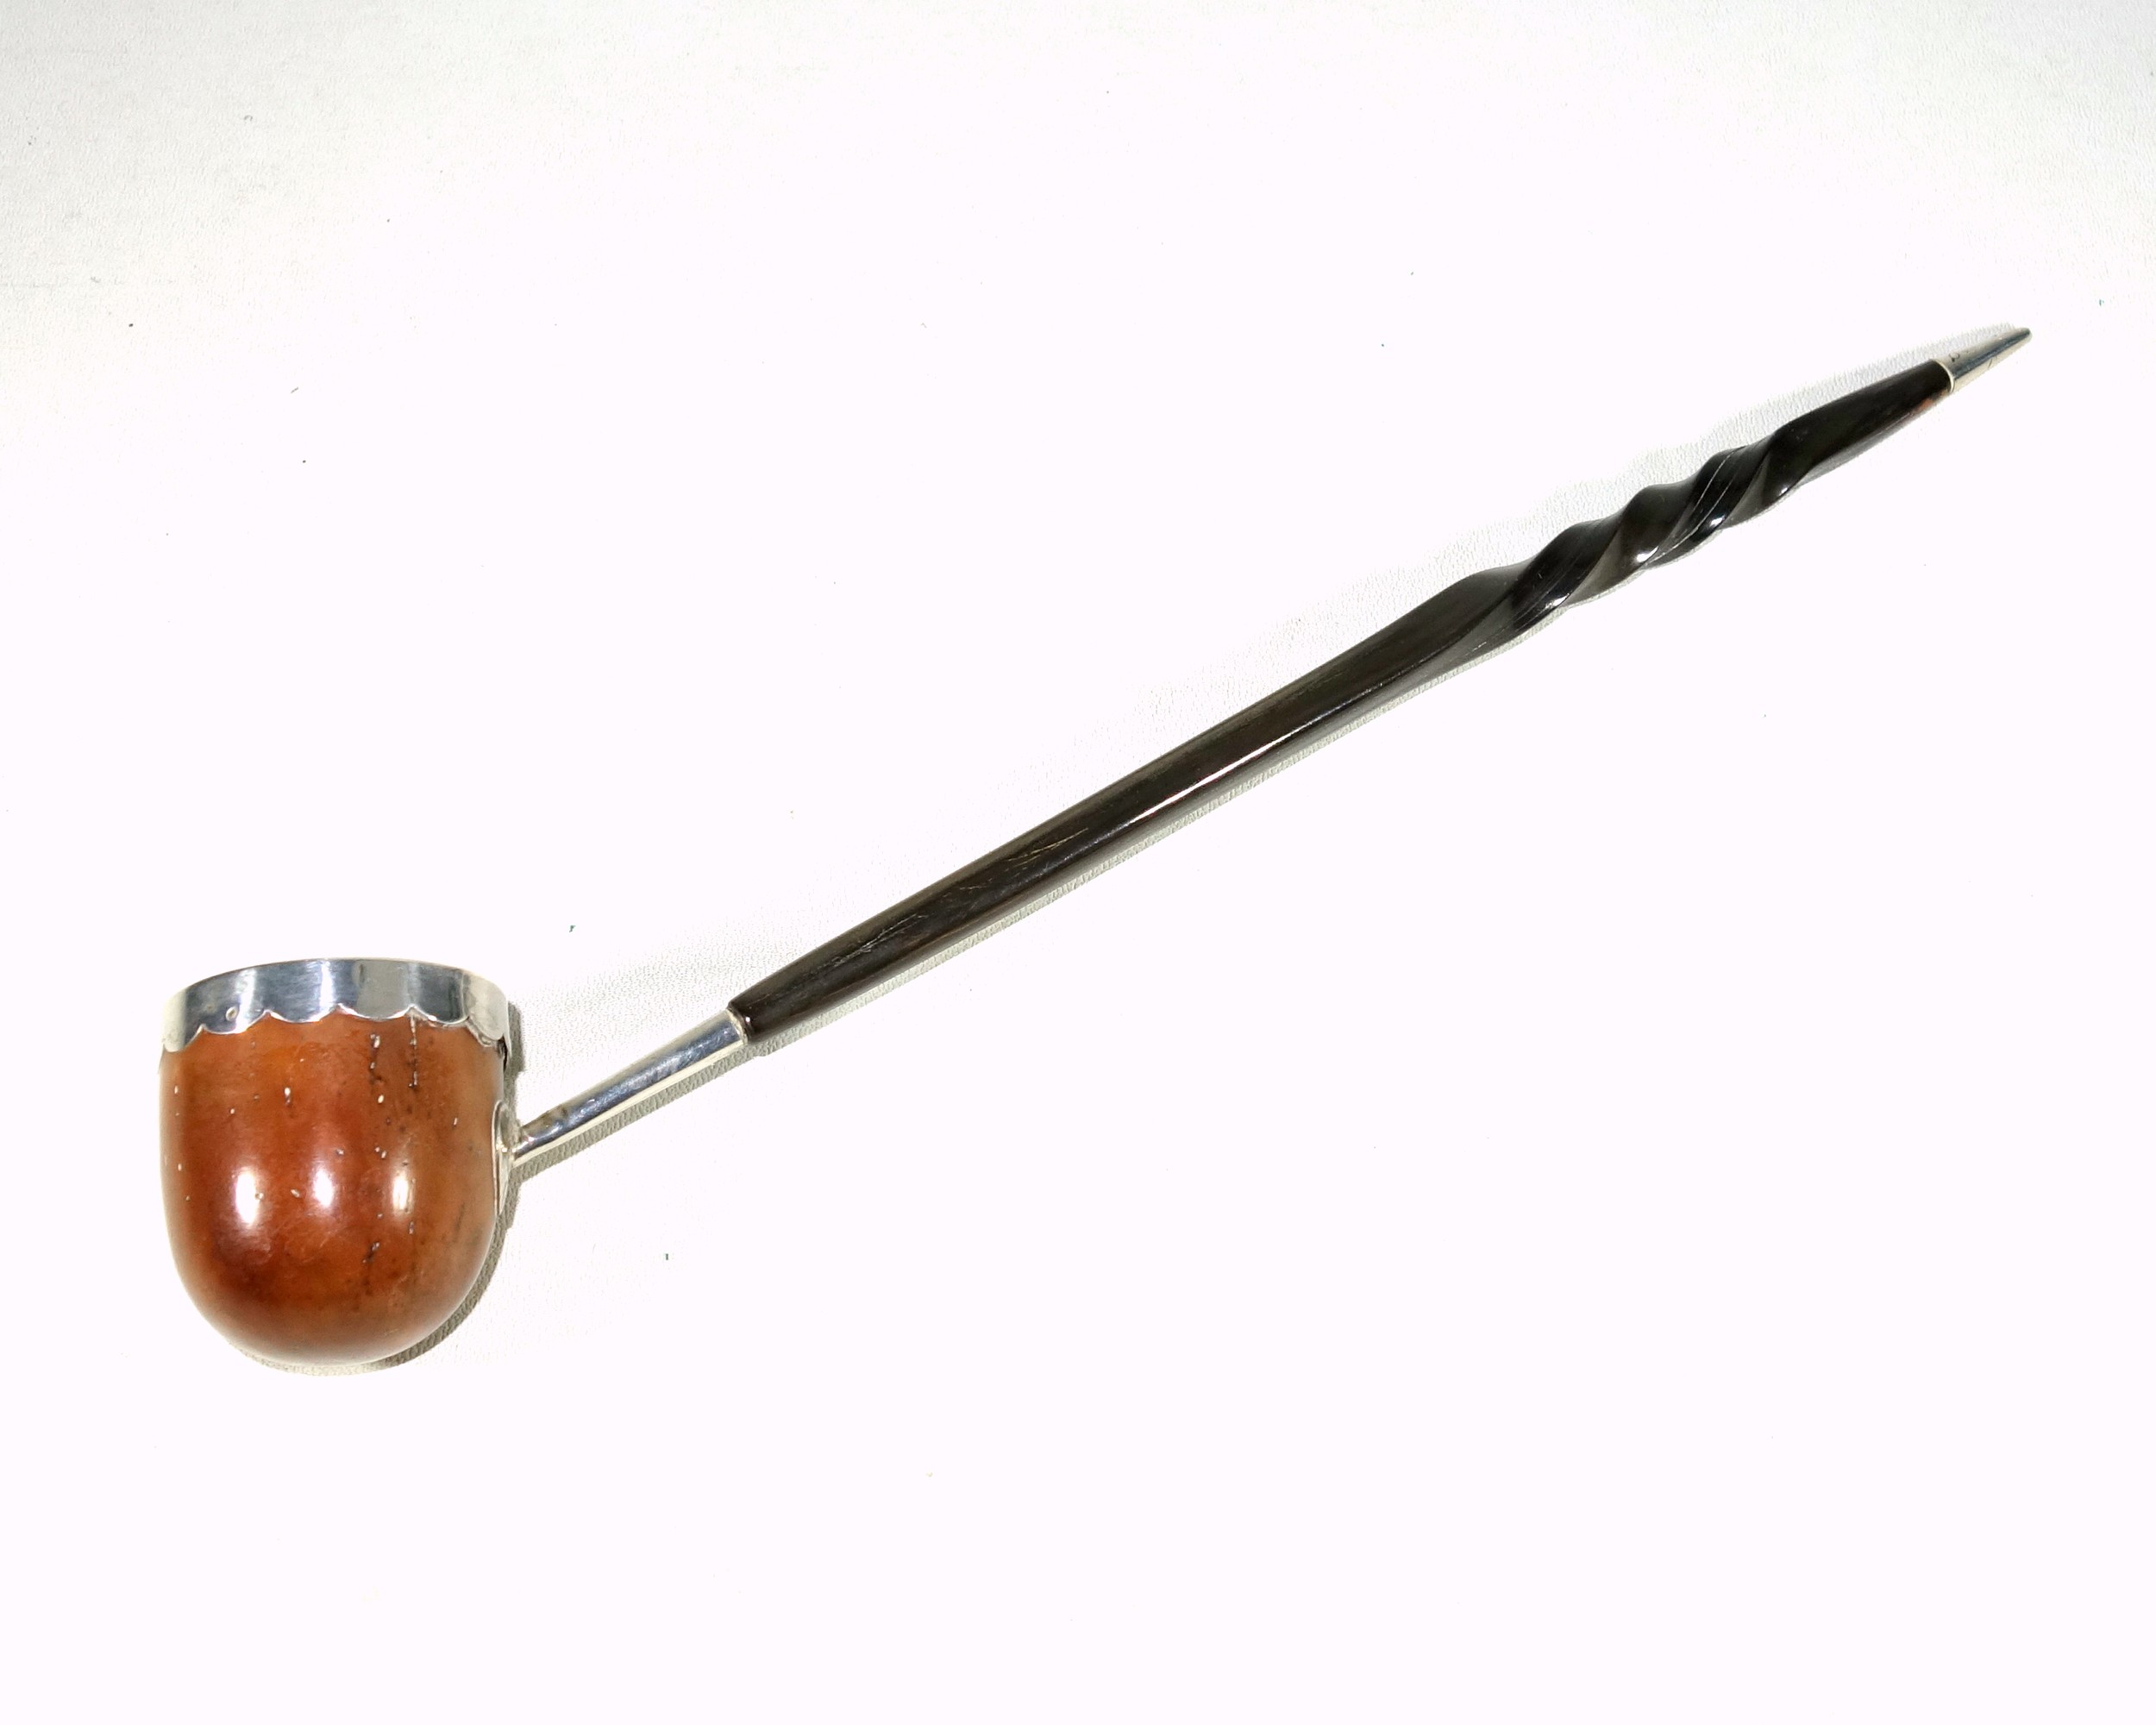 Georgian toddy ladle with a coquilla nut bowl and silver mounted rim, on a twisted whalebone handle,